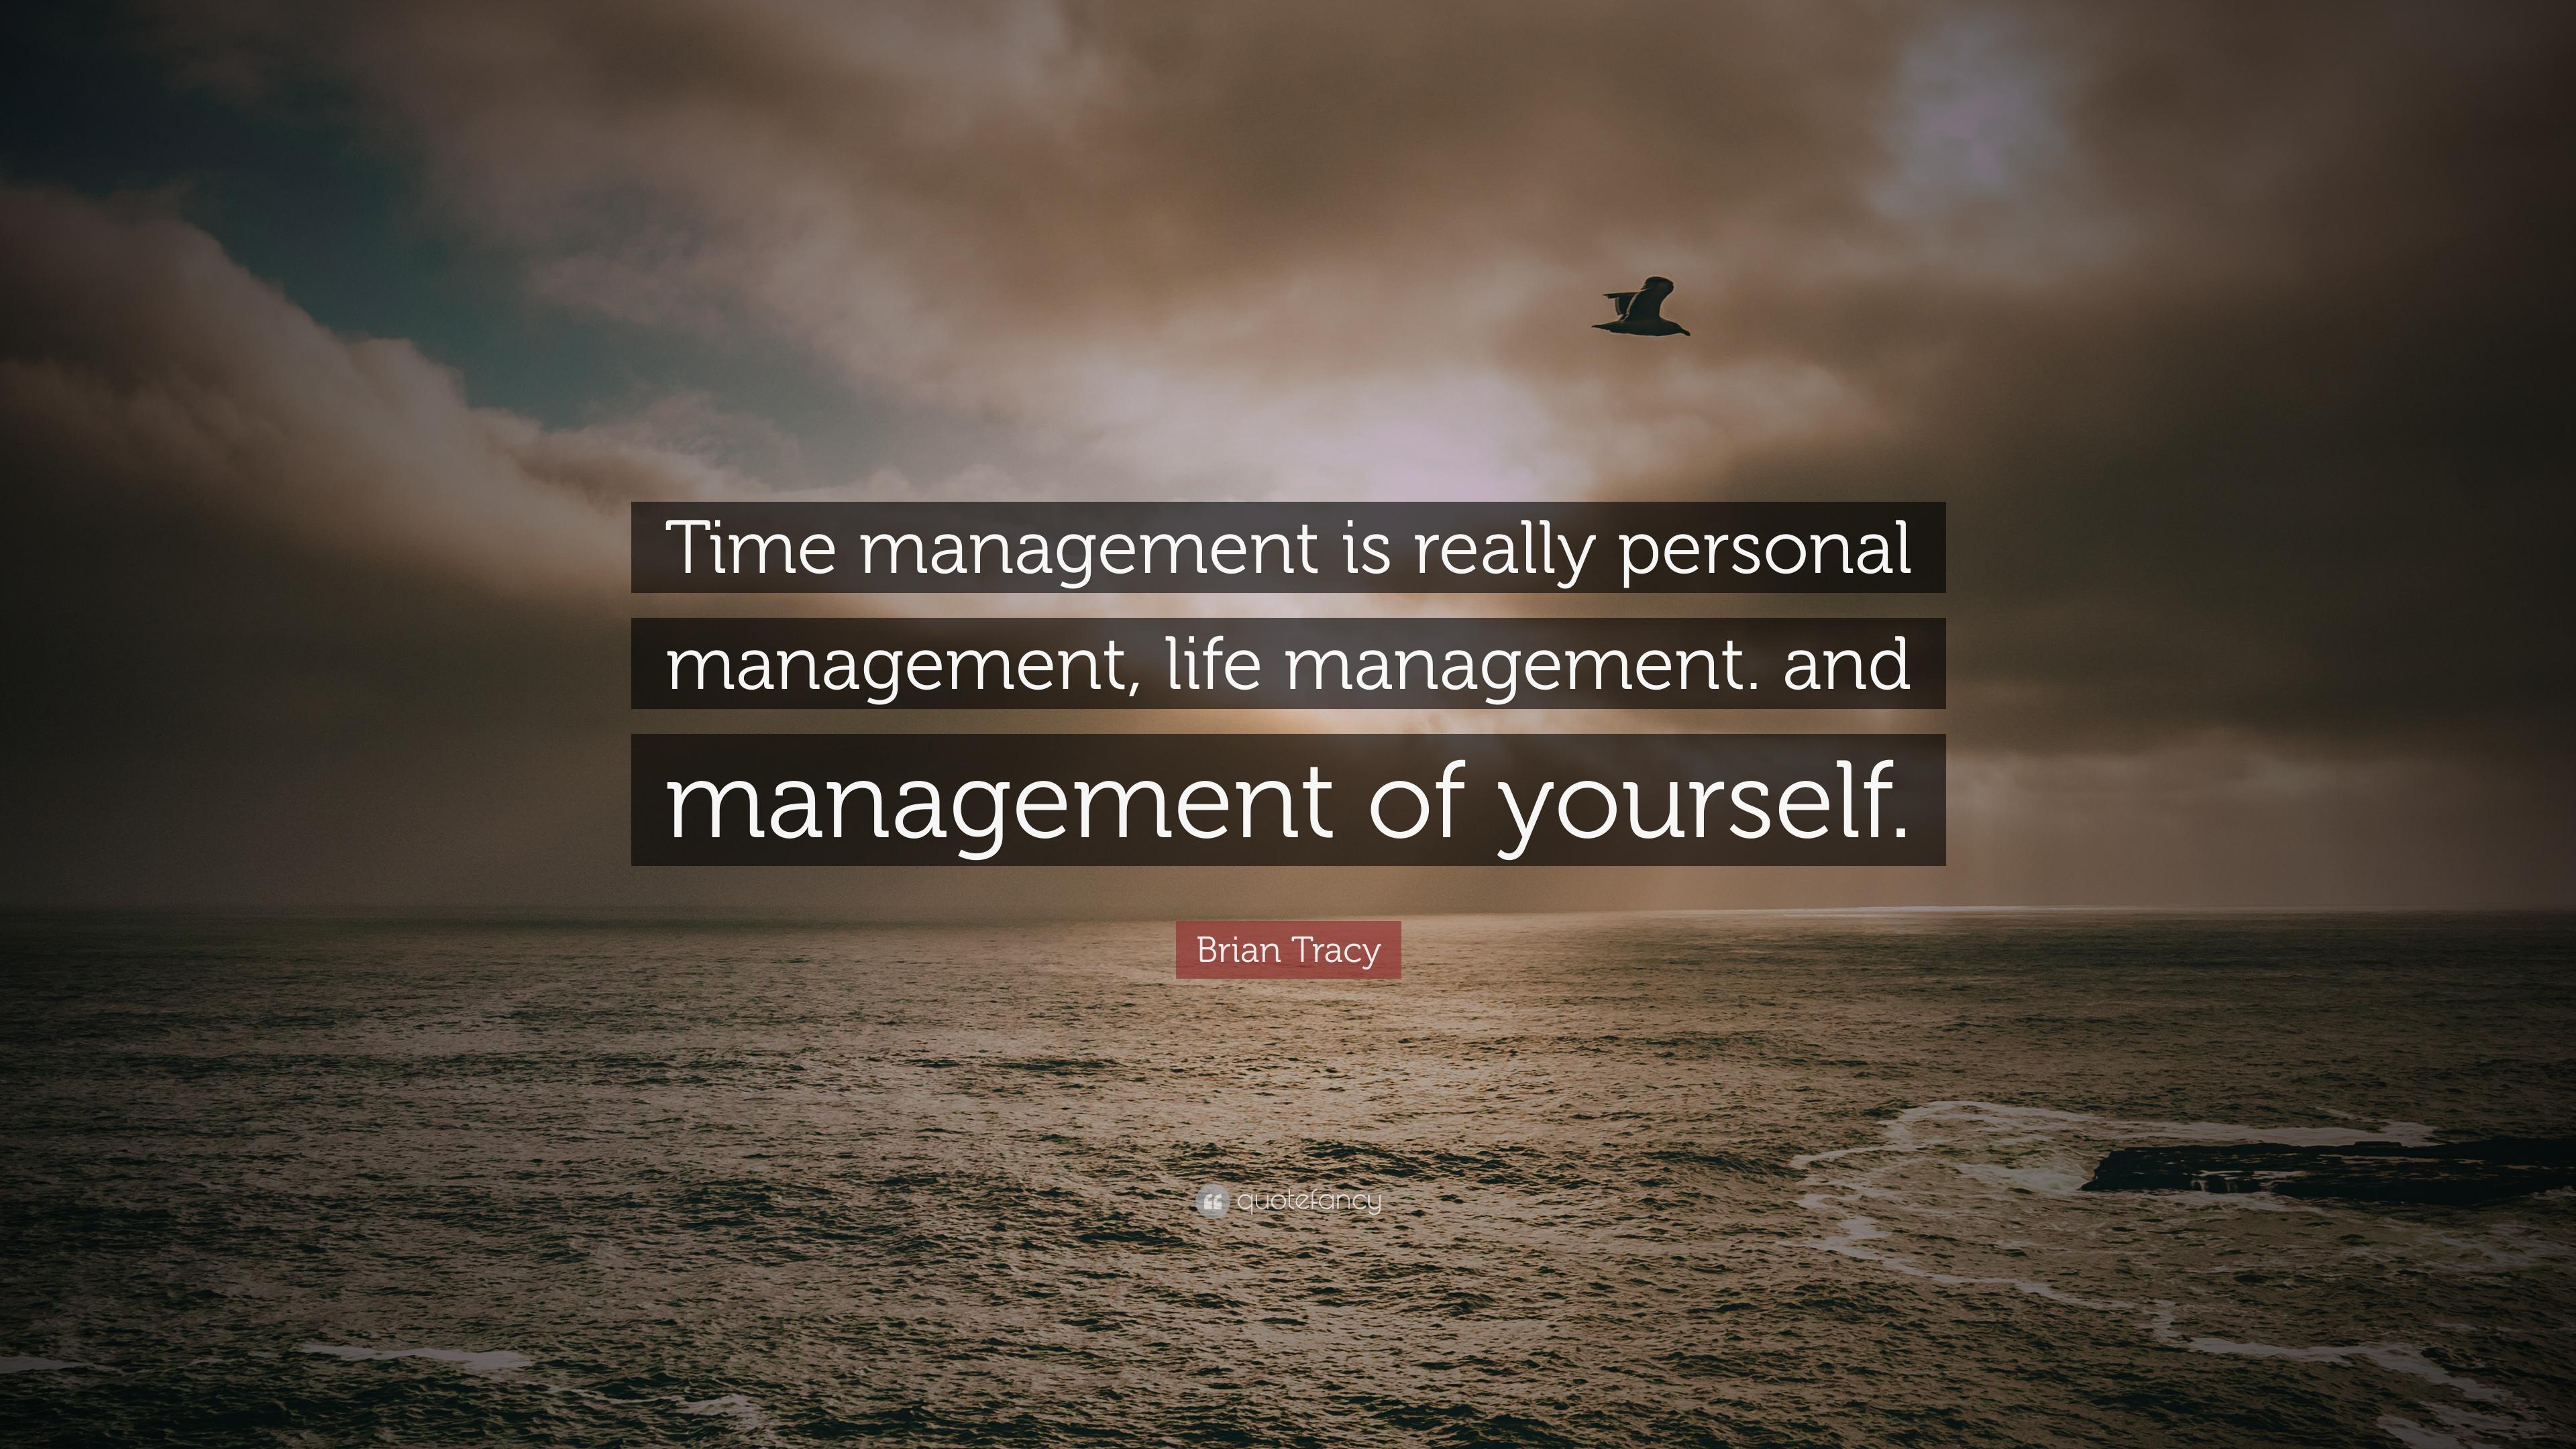 Brian Tracy Quote: “Time management is really personal management